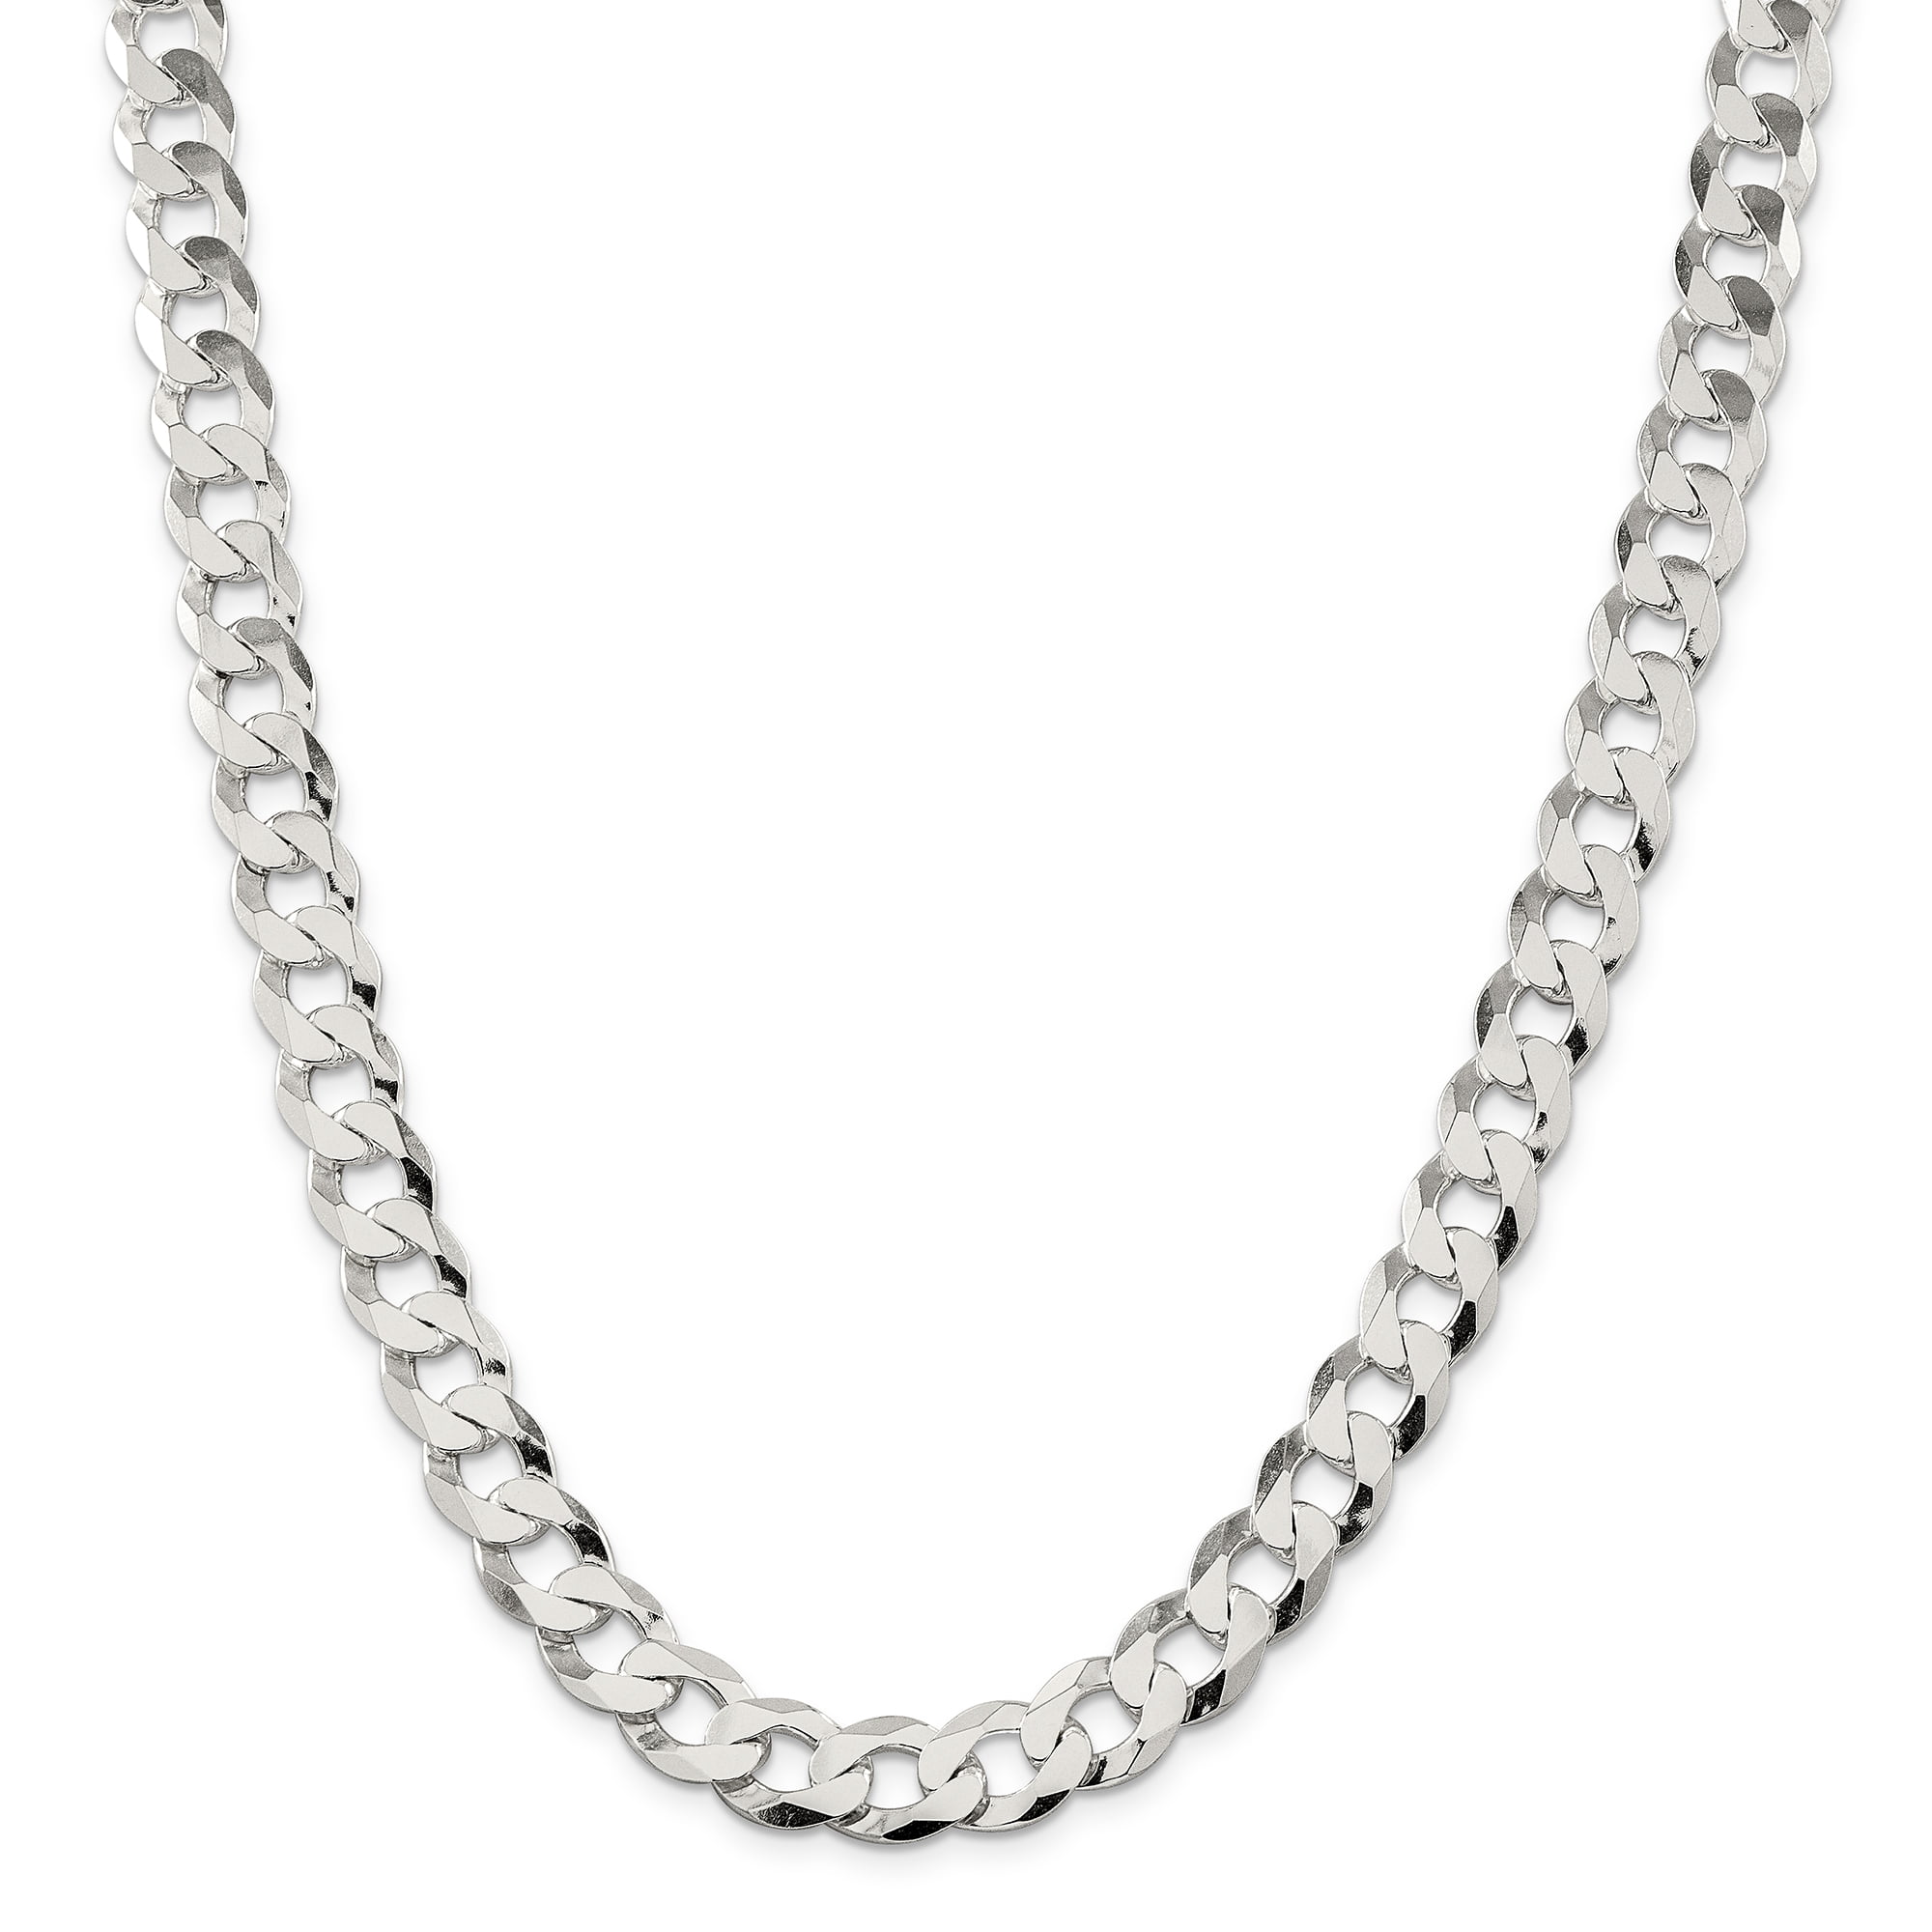 Solid 925 Sterling Silver 11.75mm Close Link Flat Curb Cuban Chain Necklace 